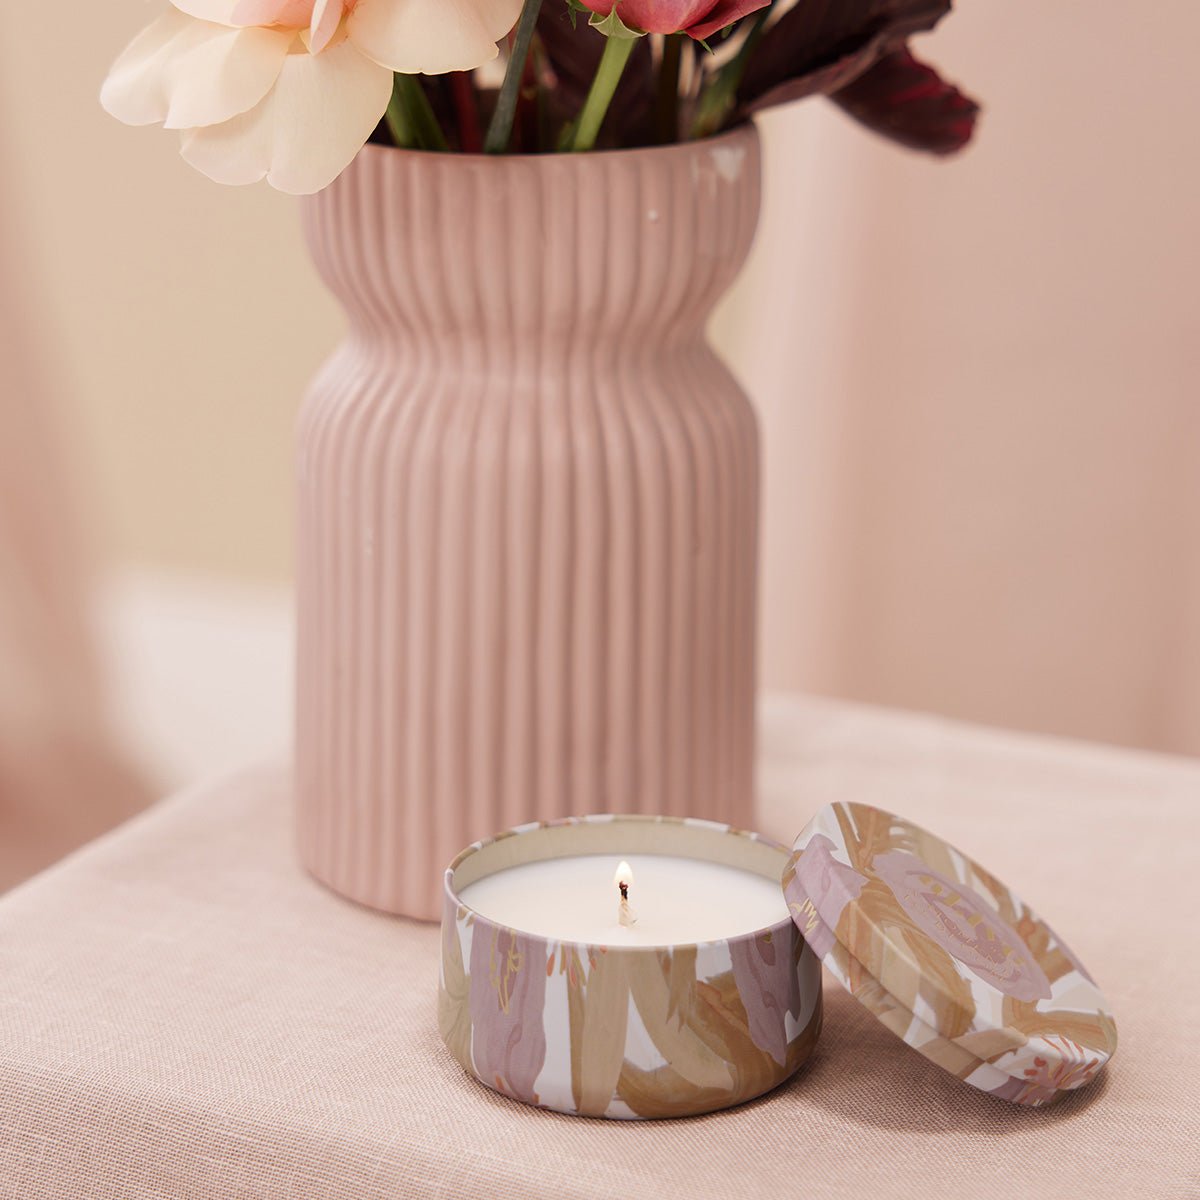 MINI SOY CANDLE - A MOMENT TO BLOOM - al.ive body